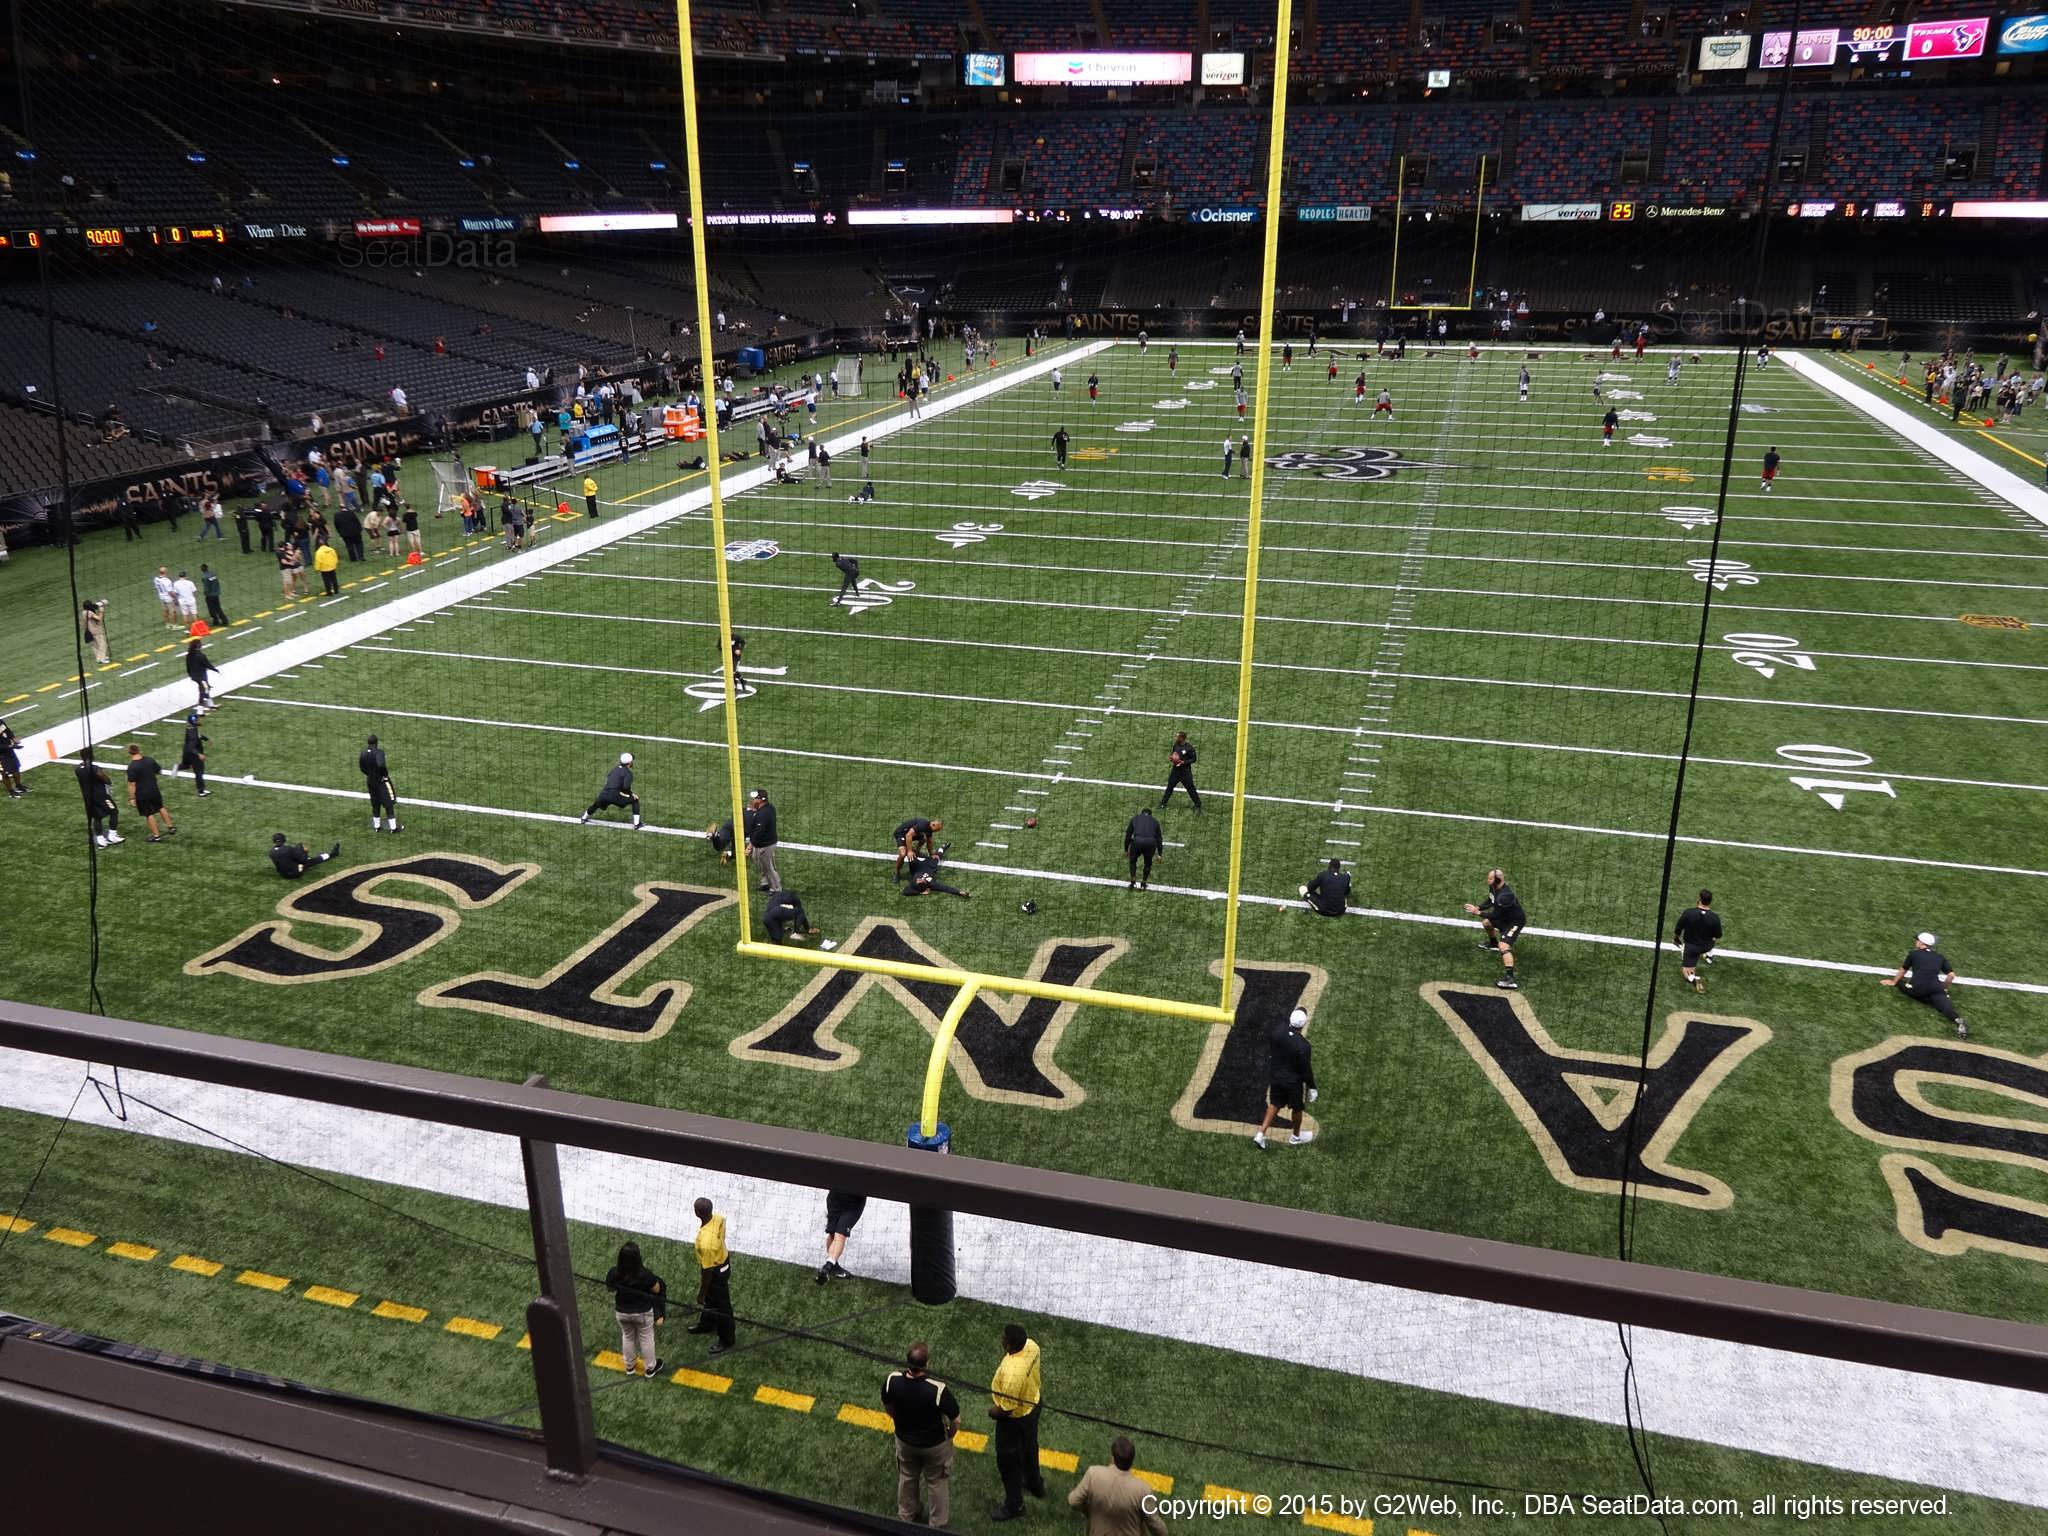 Seat view from section 241 at the Mercedes-Benz Superdome, home of the New Orleans Saints